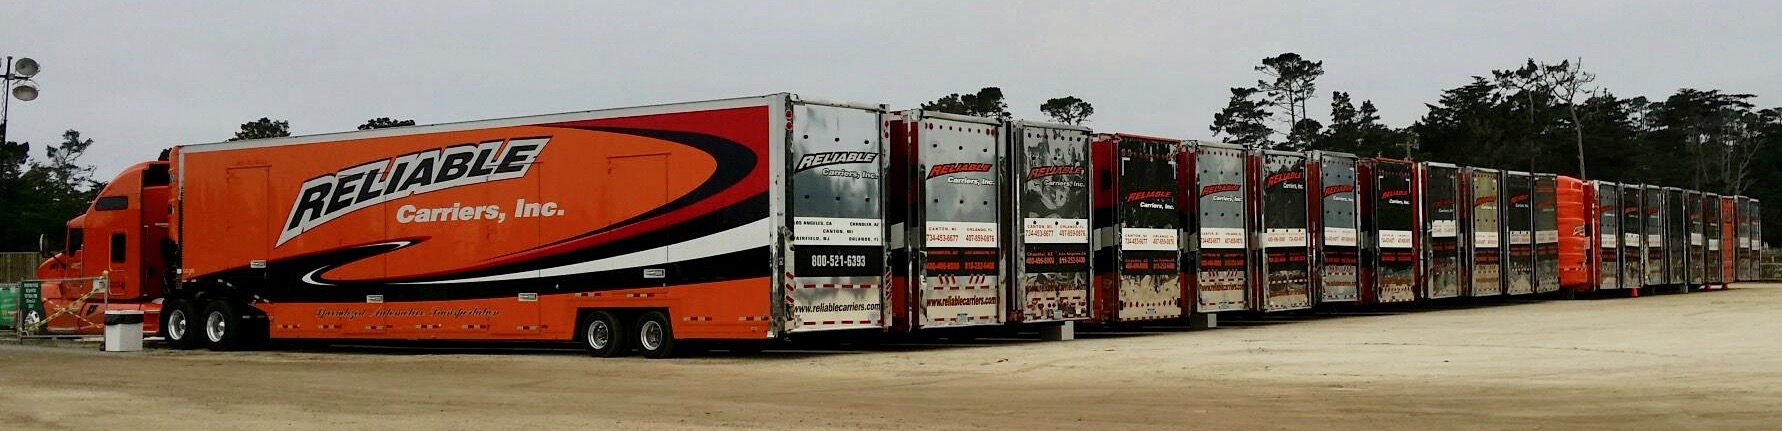 Reliable Carriers, Monterey movers: Reliable delivers more than 100 truckloads of classics to the peninsula, ClassicCars.com Journal